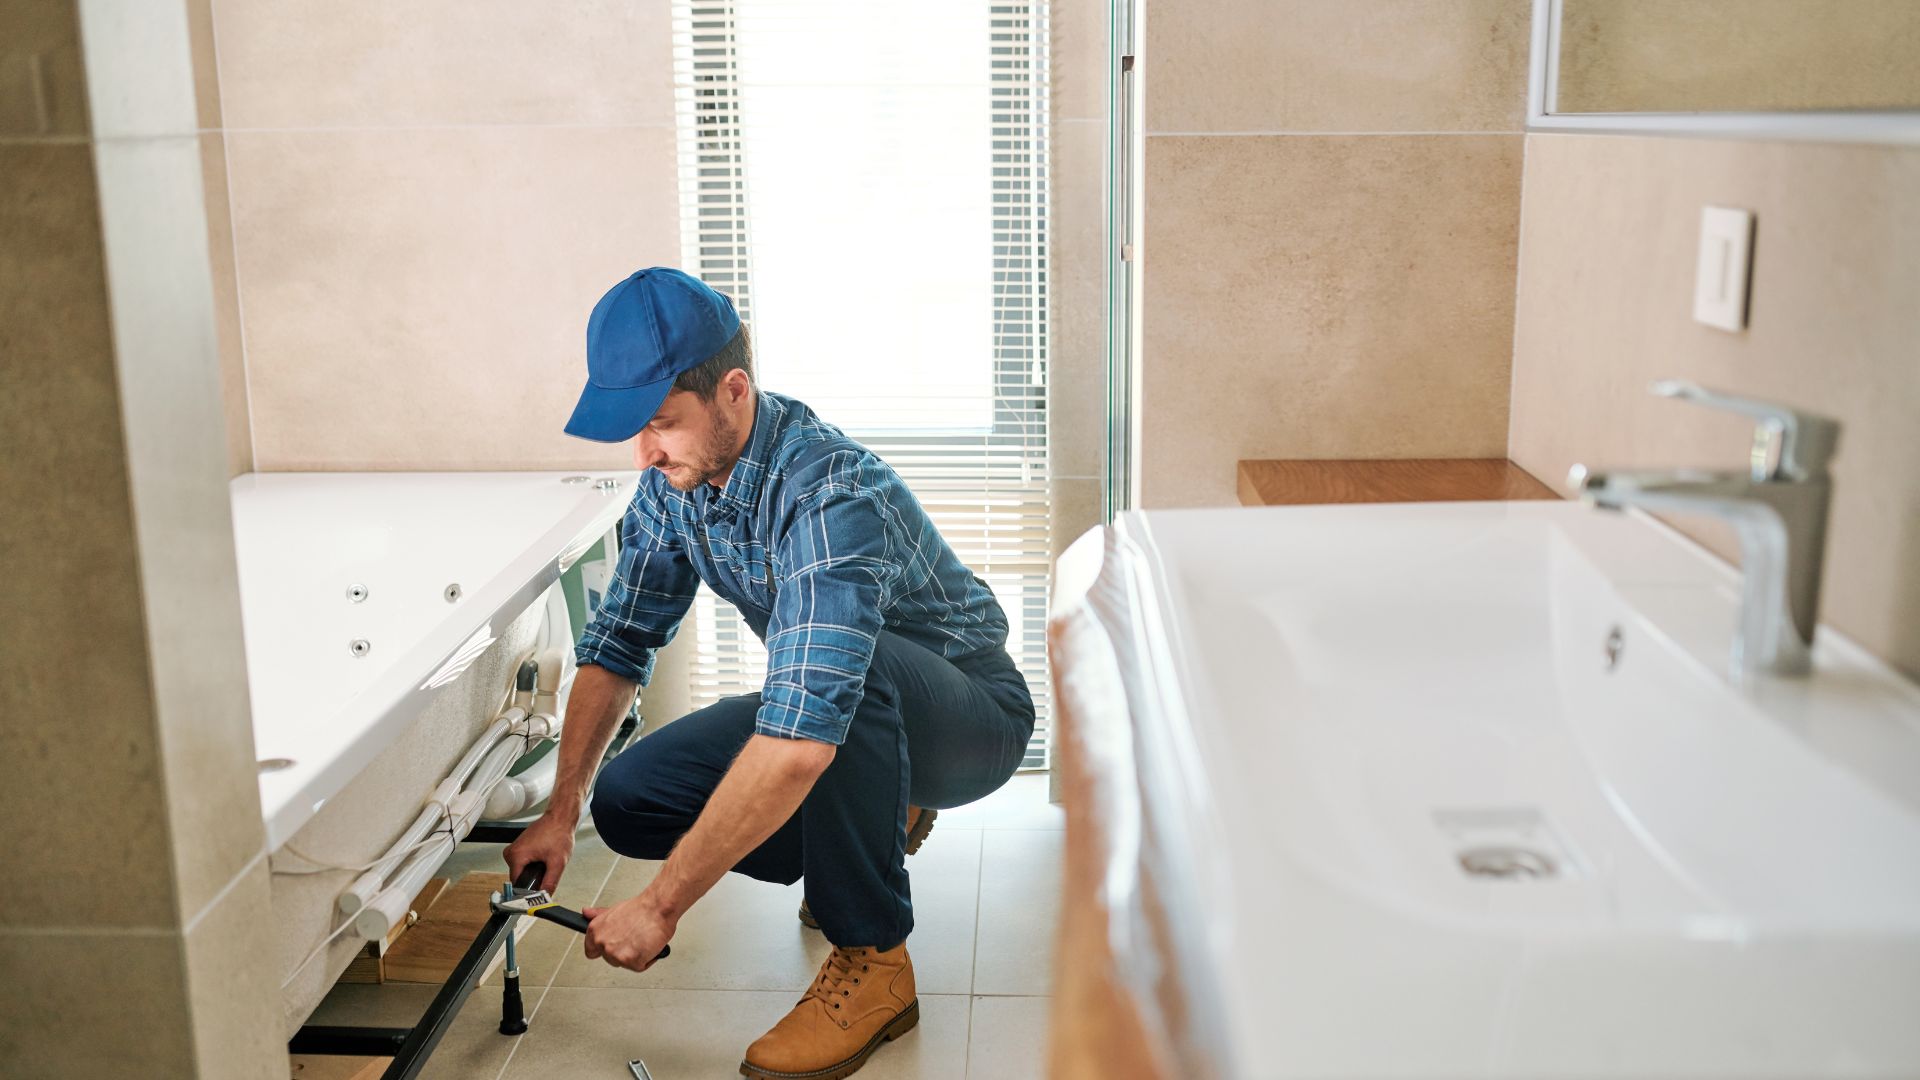 Plumbing Services for Bathrooms by Plumbers